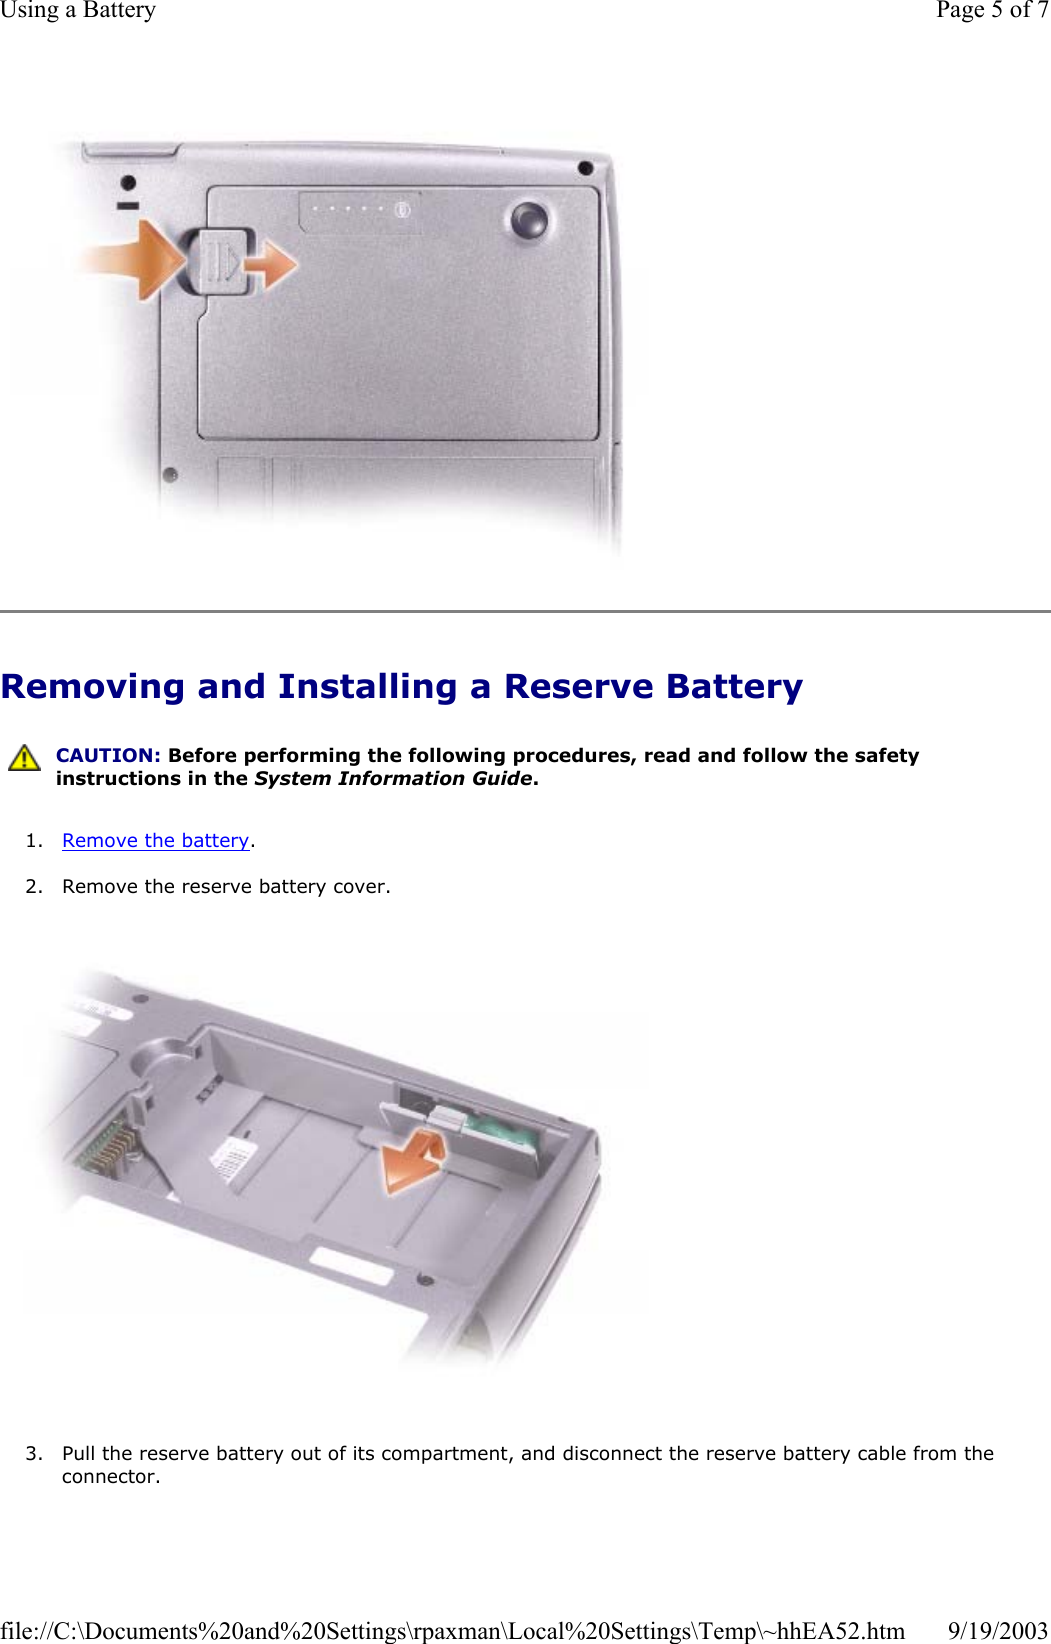   Removing and Installing a Reserve Battery 1. Remove the battery.  2. Remove the reserve battery cover.    3. Pull the reserve battery out of its compartment, and disconnect the reserve battery cable from the connector.   CAUTION: Before performing the following procedures, read and follow the safety instructions in the System Information Guide. Page 5 of 7Using a Battery9/19/2003file://C:\Documents%20and%20Settings\rpaxman\Local%20Settings\Temp\~hhEA52.htm